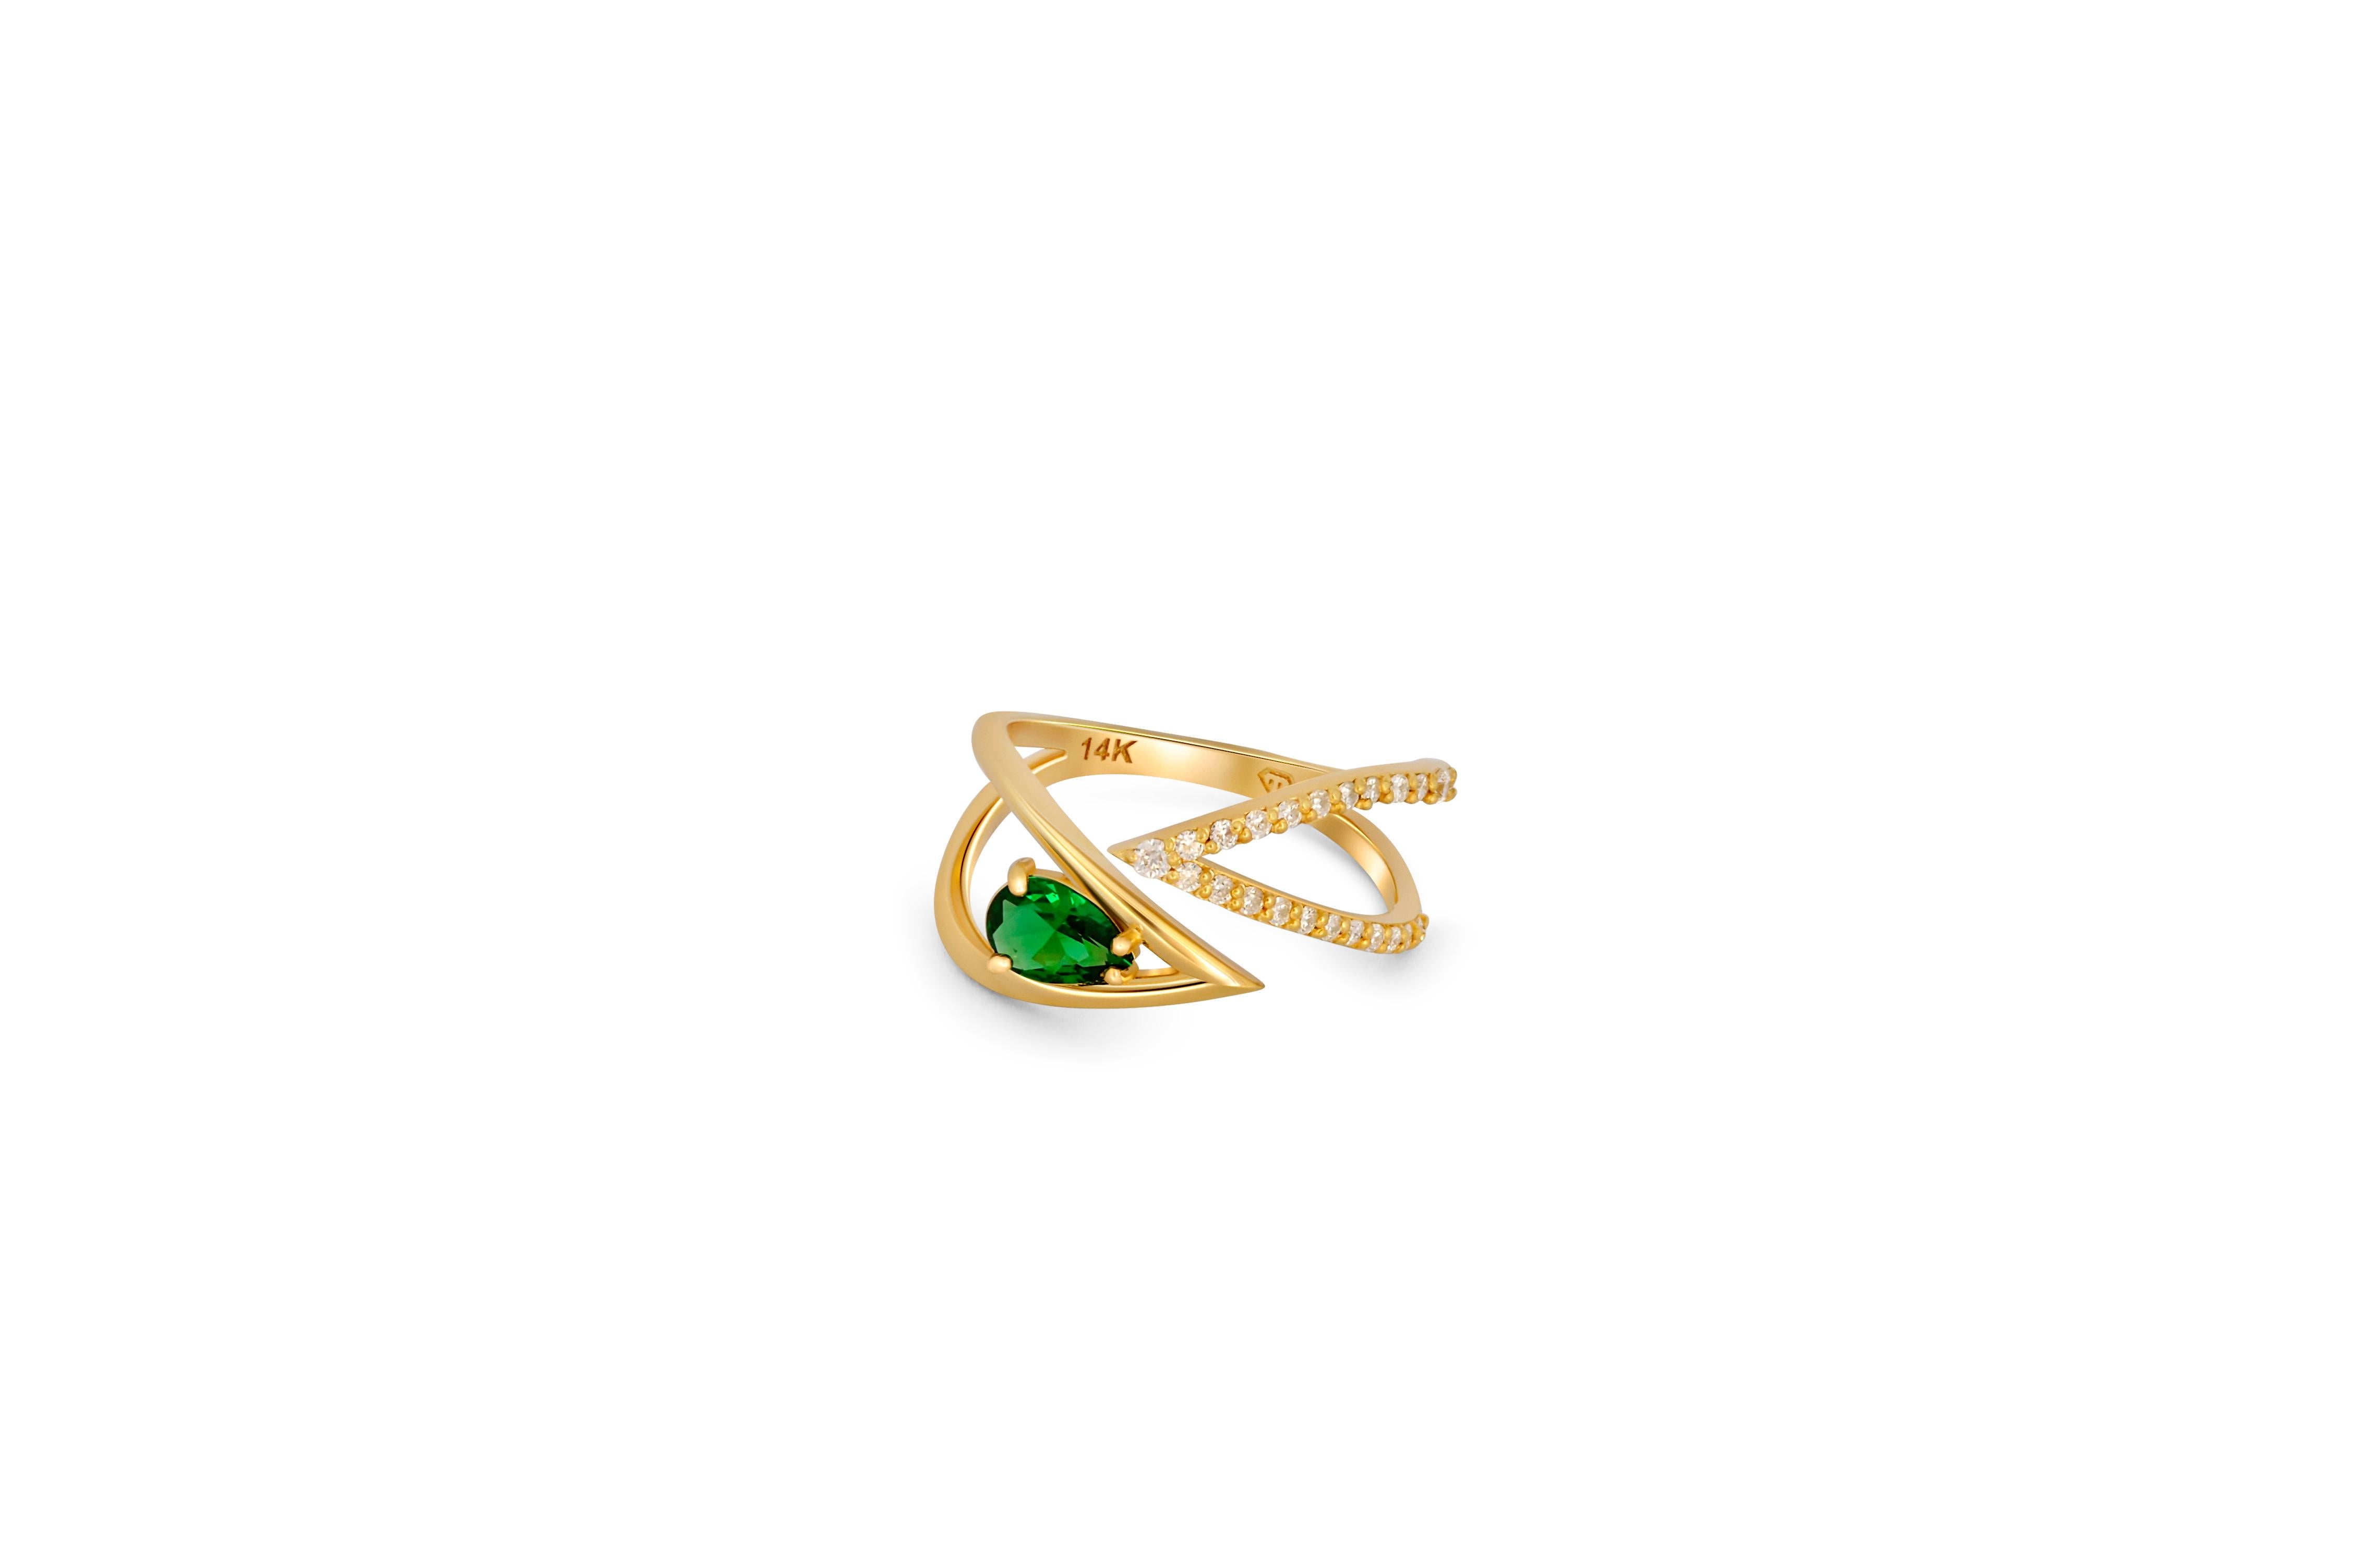 For Sale:  Pear cut lab emerald adjustable 14k gold ring. 4